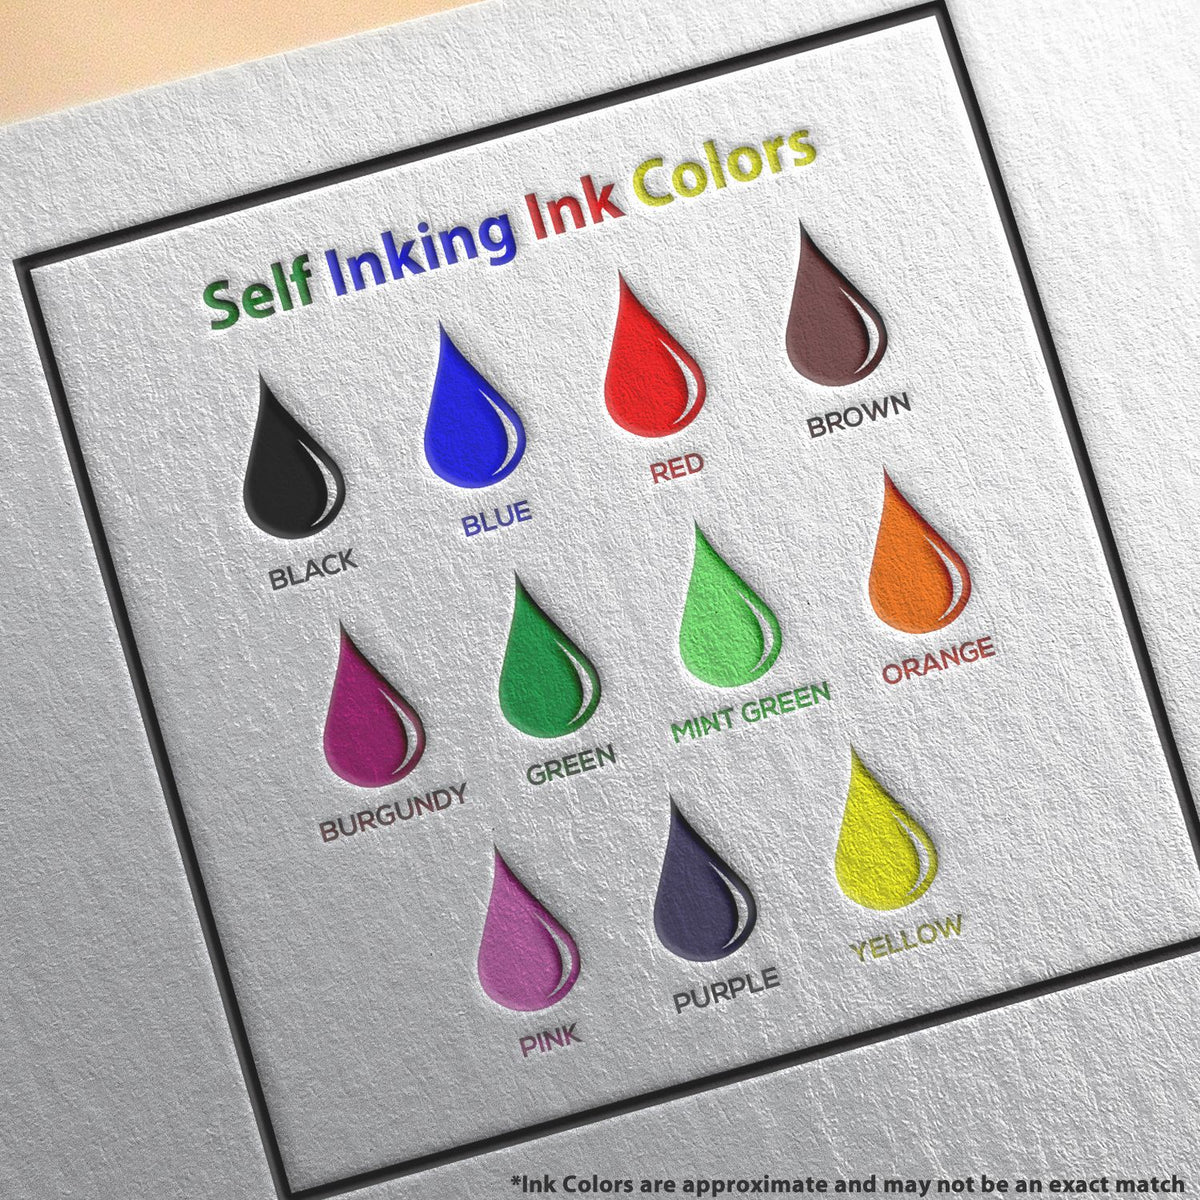 A picture showing the different ink colors or hues available for the Self-Inking Minnesota PE Stamp product.